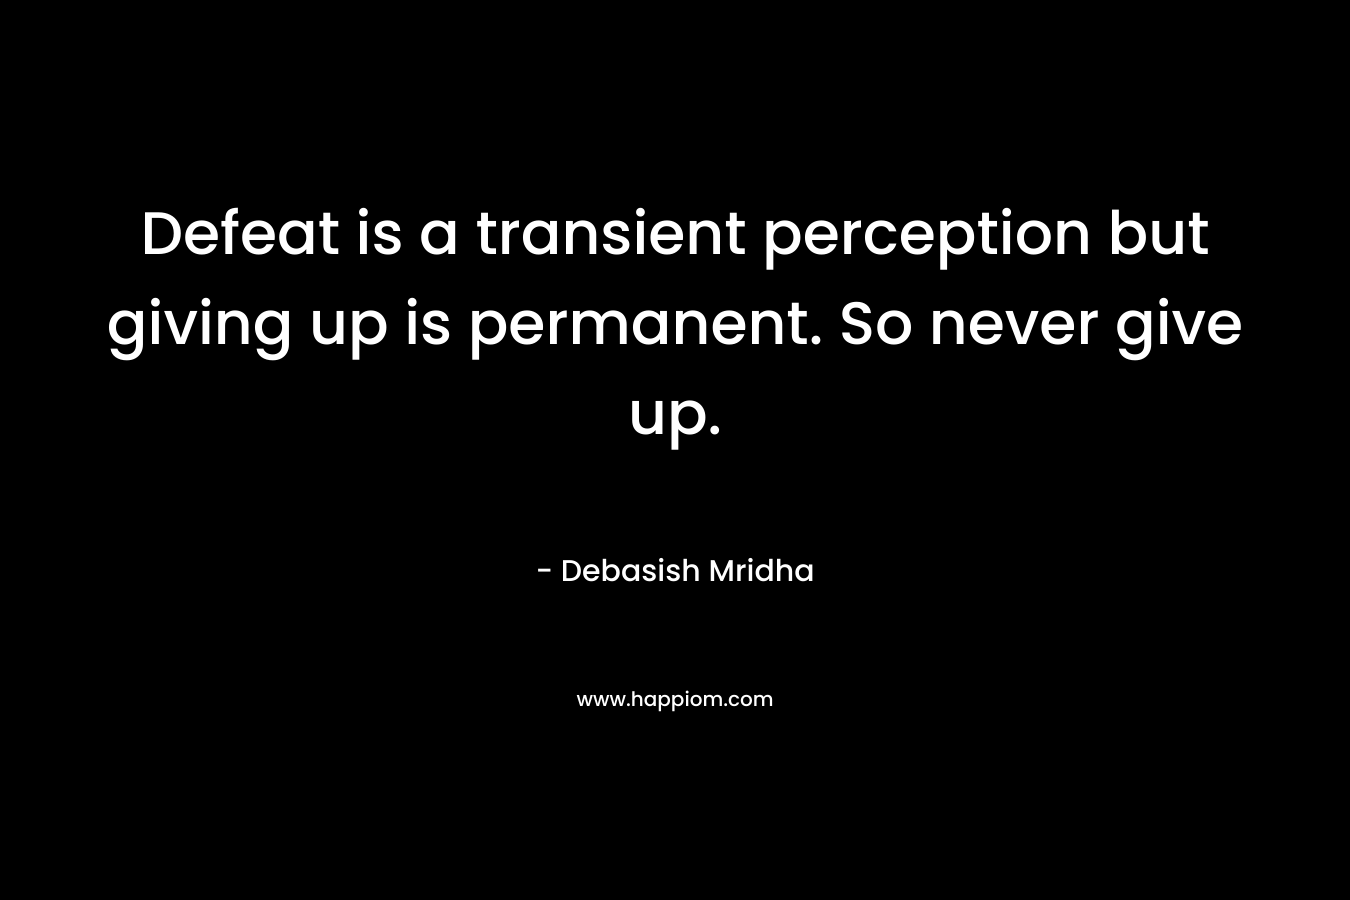 Defeat is a transient perception but giving up is permanent. So never give up. – Debasish Mridha